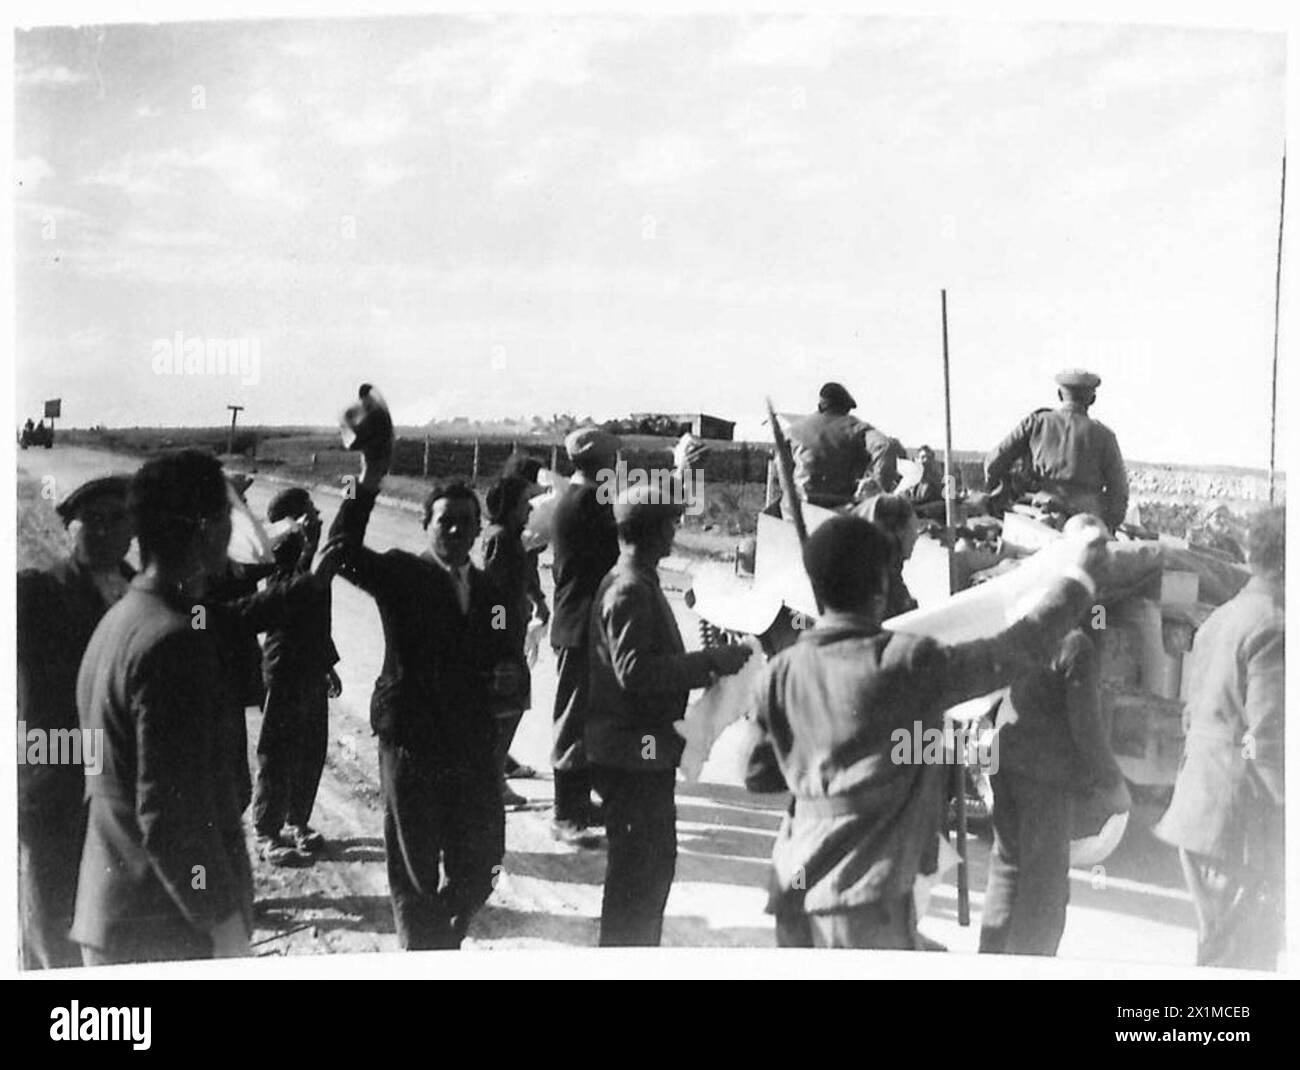 LATEST PICTURES FROM THE WESTERN DESERT AT GIOVANNI CIRENE AREA - Our troops, on entering Giovvani Berta, were to given a cordial reception by the local inhabitants who, on seeing the friendliness of the British, waved white flags to cheer them on instead of using them for a signal of surrender, British Army Stock Photo